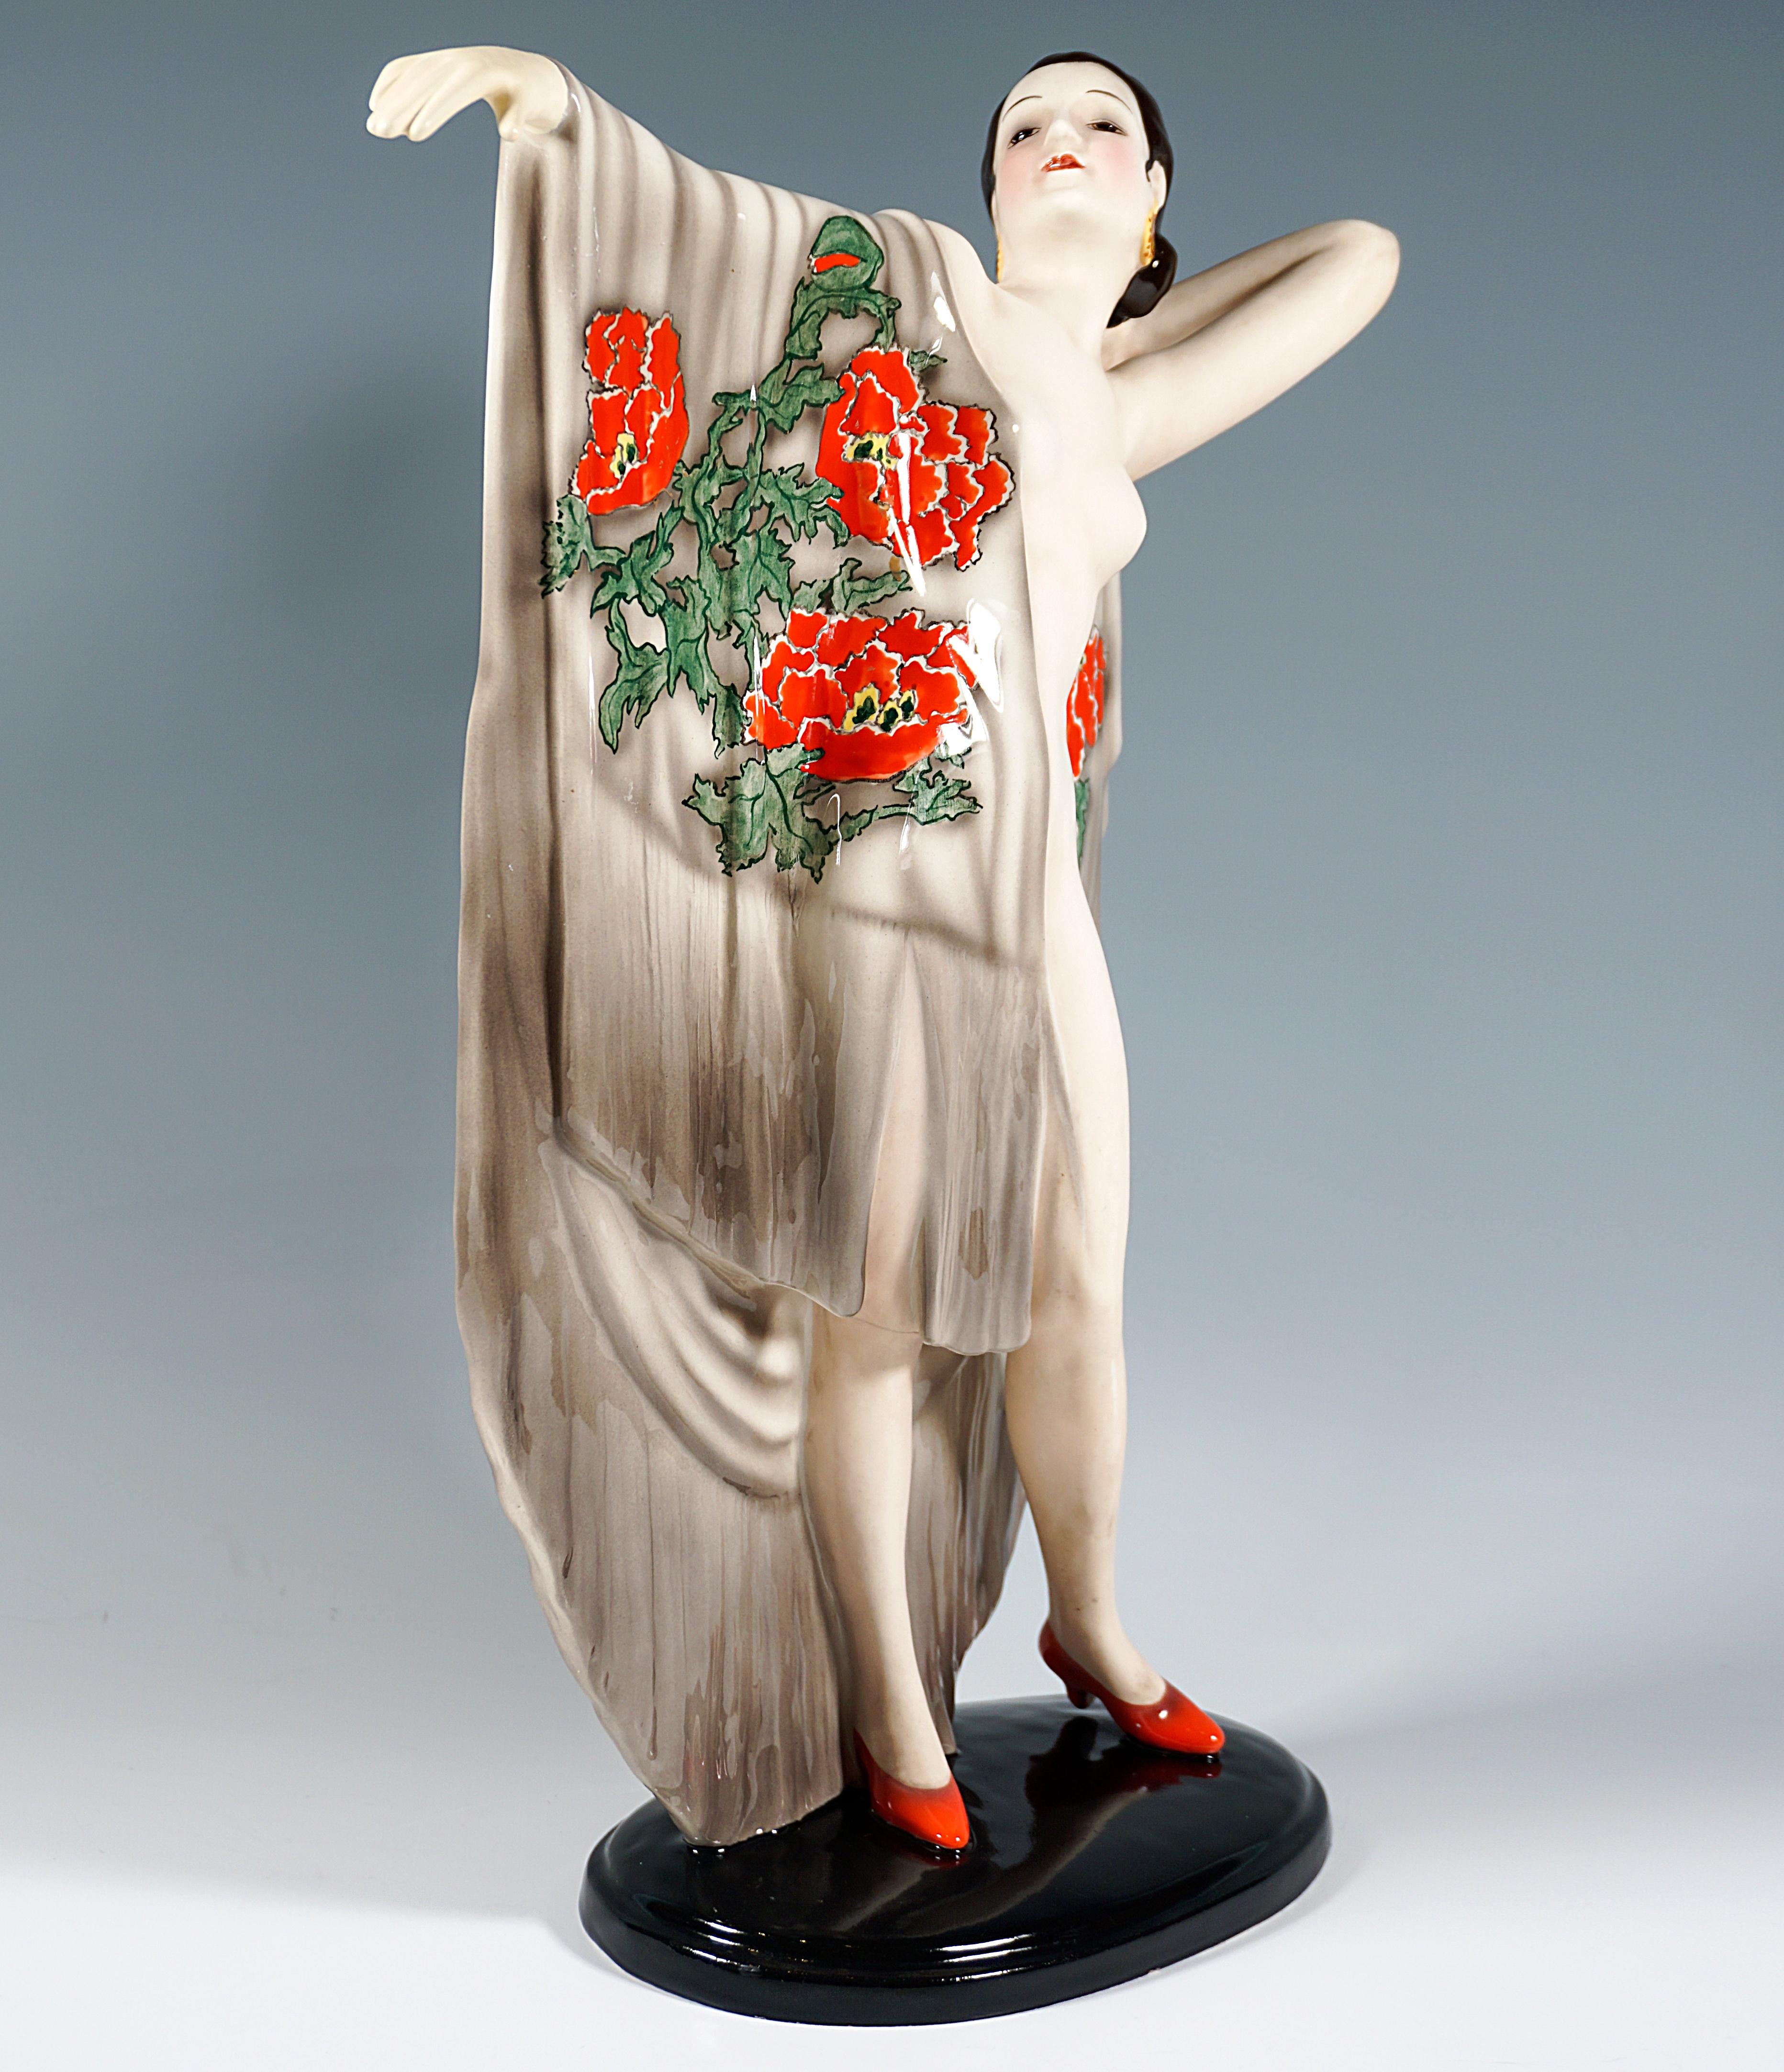 Rare Goldscheider Ceramic Figurine of the 1940s:
Standing young pretty lady with dark hair tied at the nape of her neck and ear jewelry in the style of a Spanish woman, presenting a large beige cloth with large-scale red poppy decoration on her